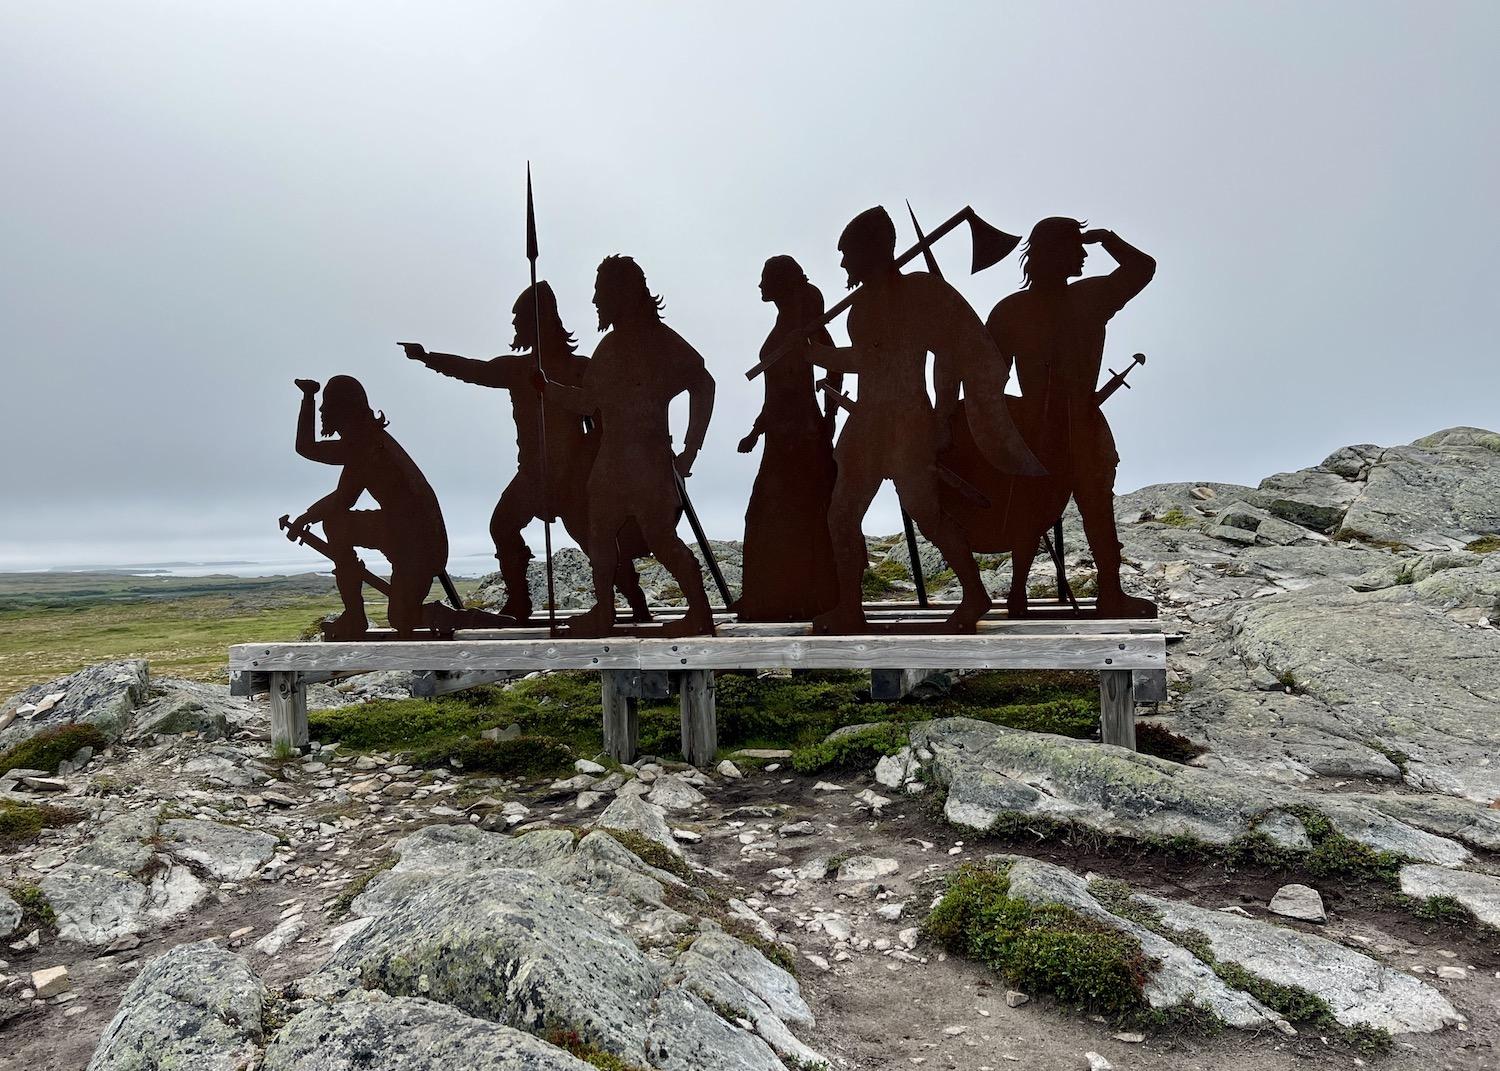 A Corten steel sculpture at L'Anse Aux Meadows National Historic Site depicts how Vikings used the area as a base camp for their explorations.